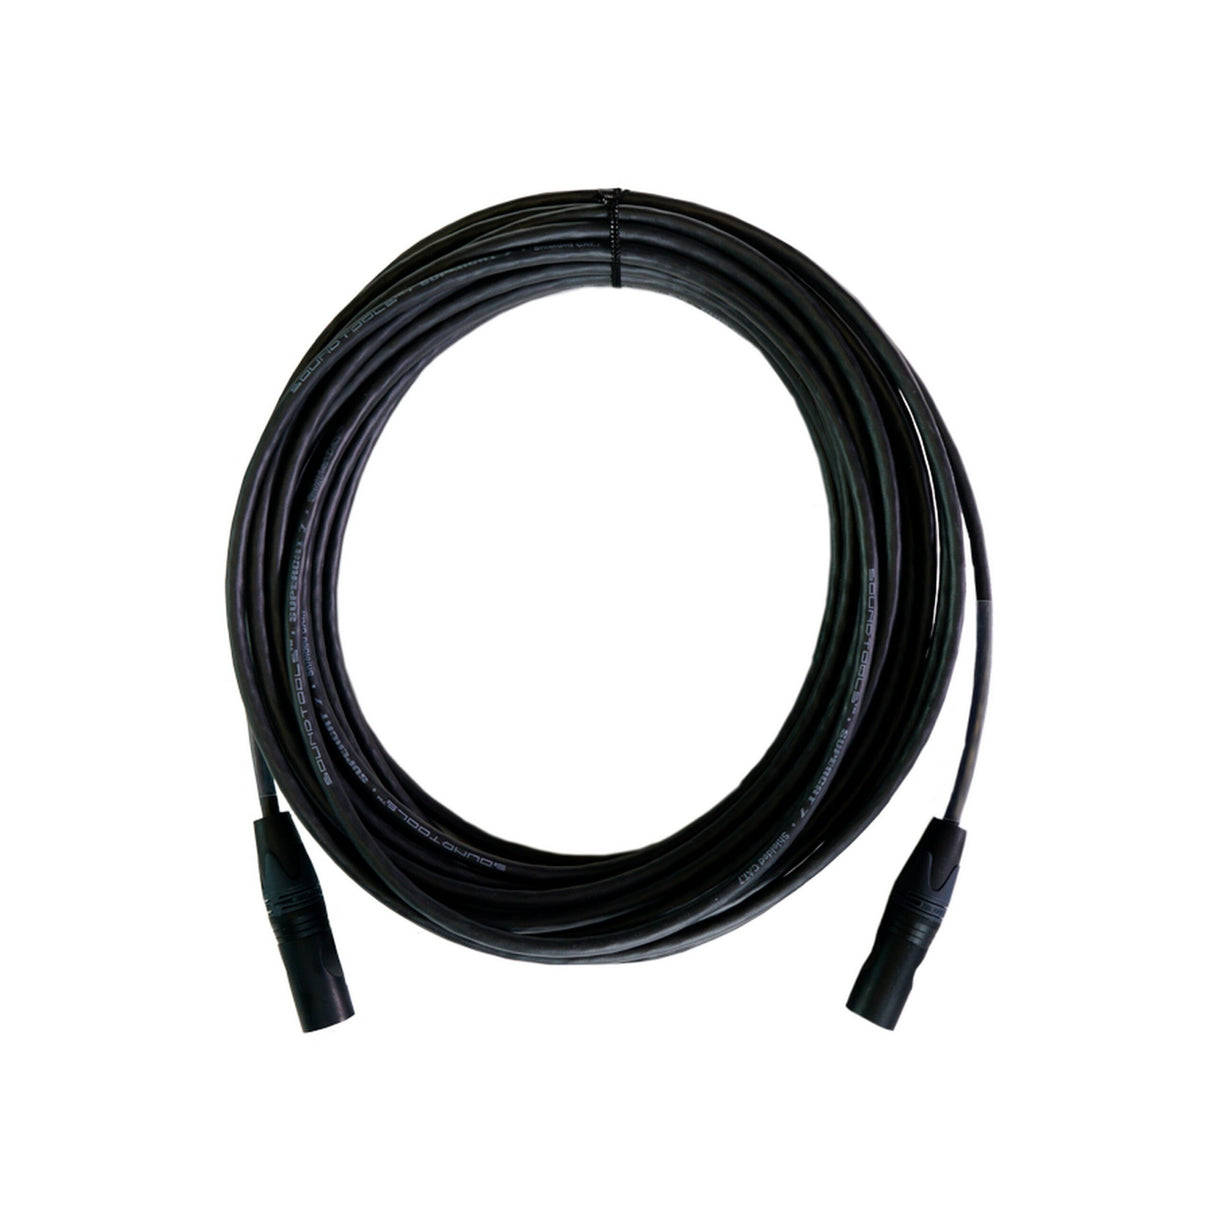 SoundTools SuperCAT 7 etherCON to etherCON CAT 7 Cable, 50-Foot Black